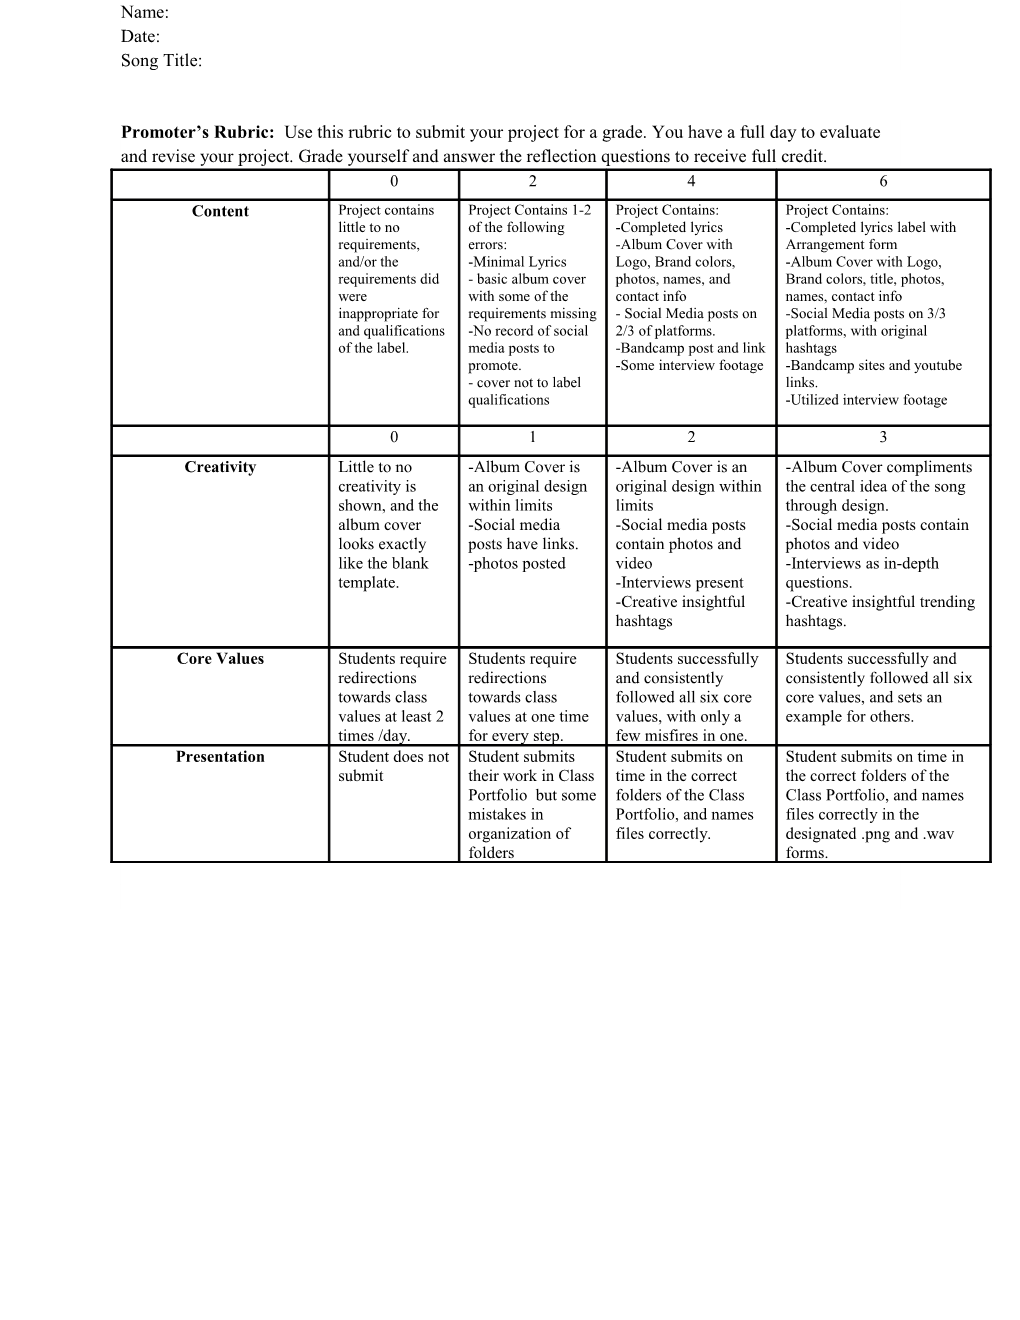 Promoter S Rubric: Use This Rubric to Submit Your Project for a Grade. You Have a Full